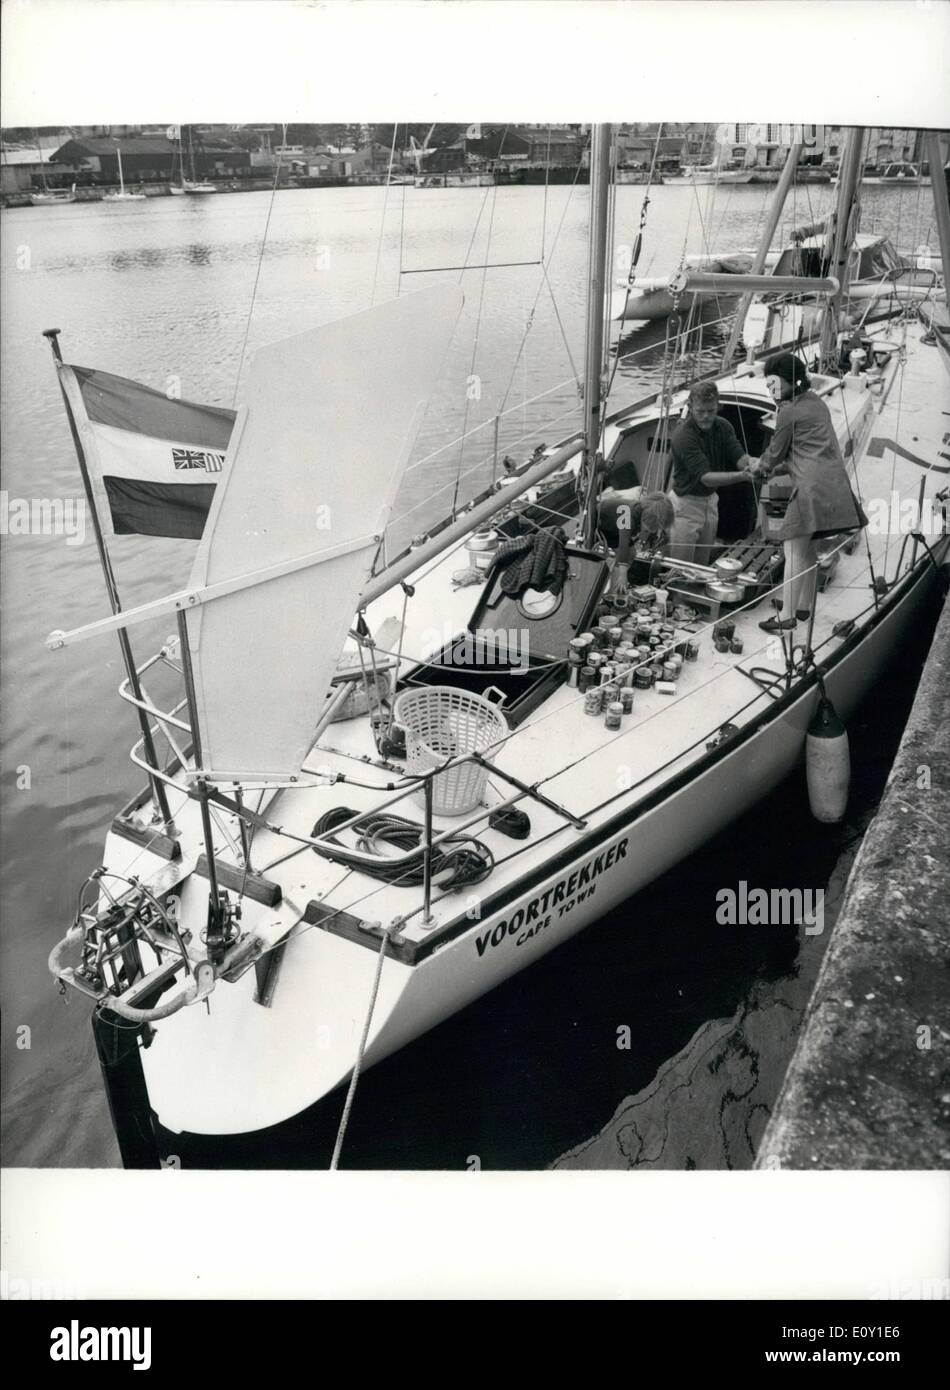 May 05, 1968 - Preparing to face the Atlantic Alone. On Saturday ( June 1 ), 43 yachts from 10 countries, with 3,000 miles of lonely Atlantic ahead of them - set out from Plymouth Single-handed for Newport, Rhode Island. Yesterday yachtsmen were stowing gear and stores in readiness for the start. Photo Shows The 50ft. Ketch Voortrekker, one of the favorites, from South Africa, was being victualled by Mr. Bruce Dalling, with the help of his sister, Mrs. Carole Charmier, and her daughter, Emmy. Stock Photo